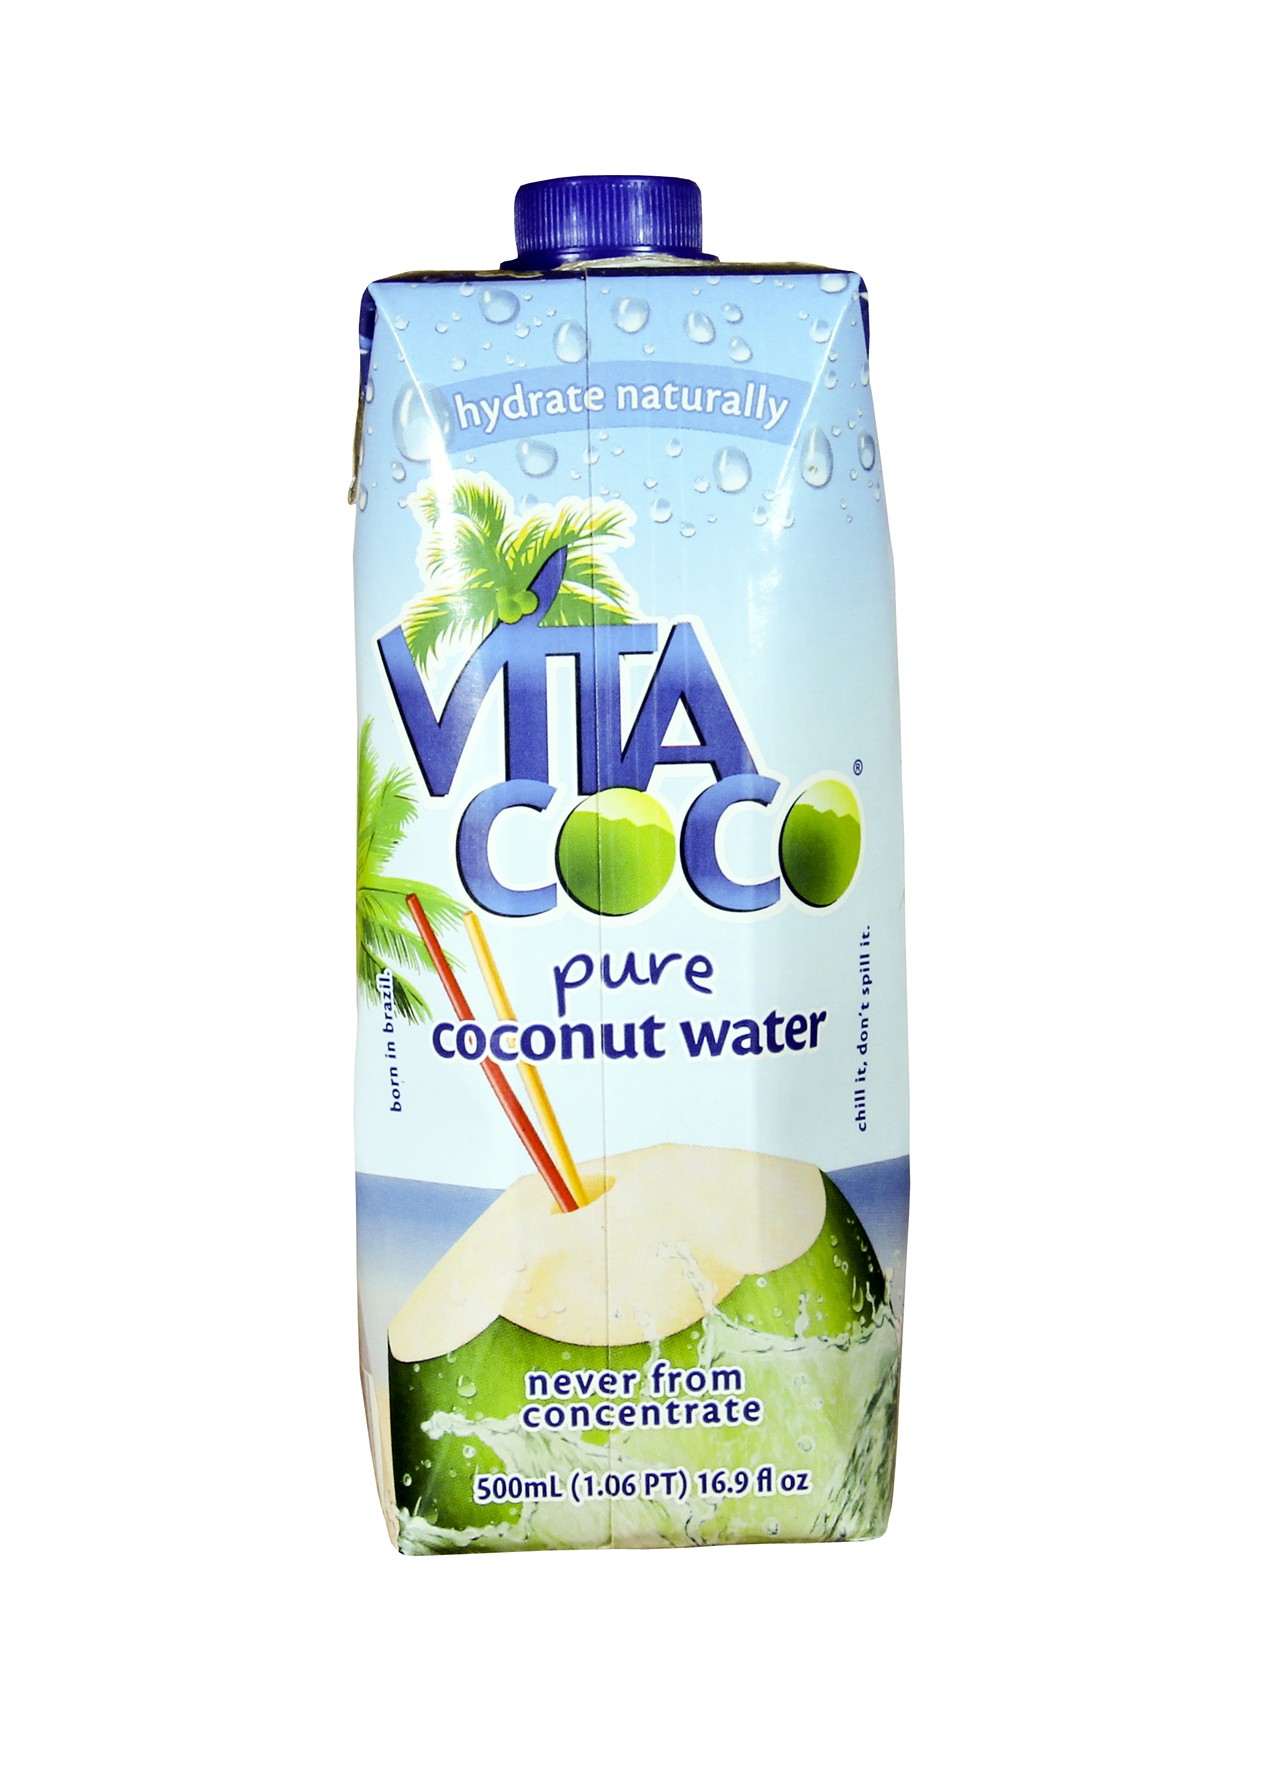 Go Tropical. With a combination of electrolytes, potassium, and anti-oxidants, coconut water packs a hangover-fighting punch in a tropical package. And it has the added bonus of neutralizing some of that acid churning in your soused stomach.